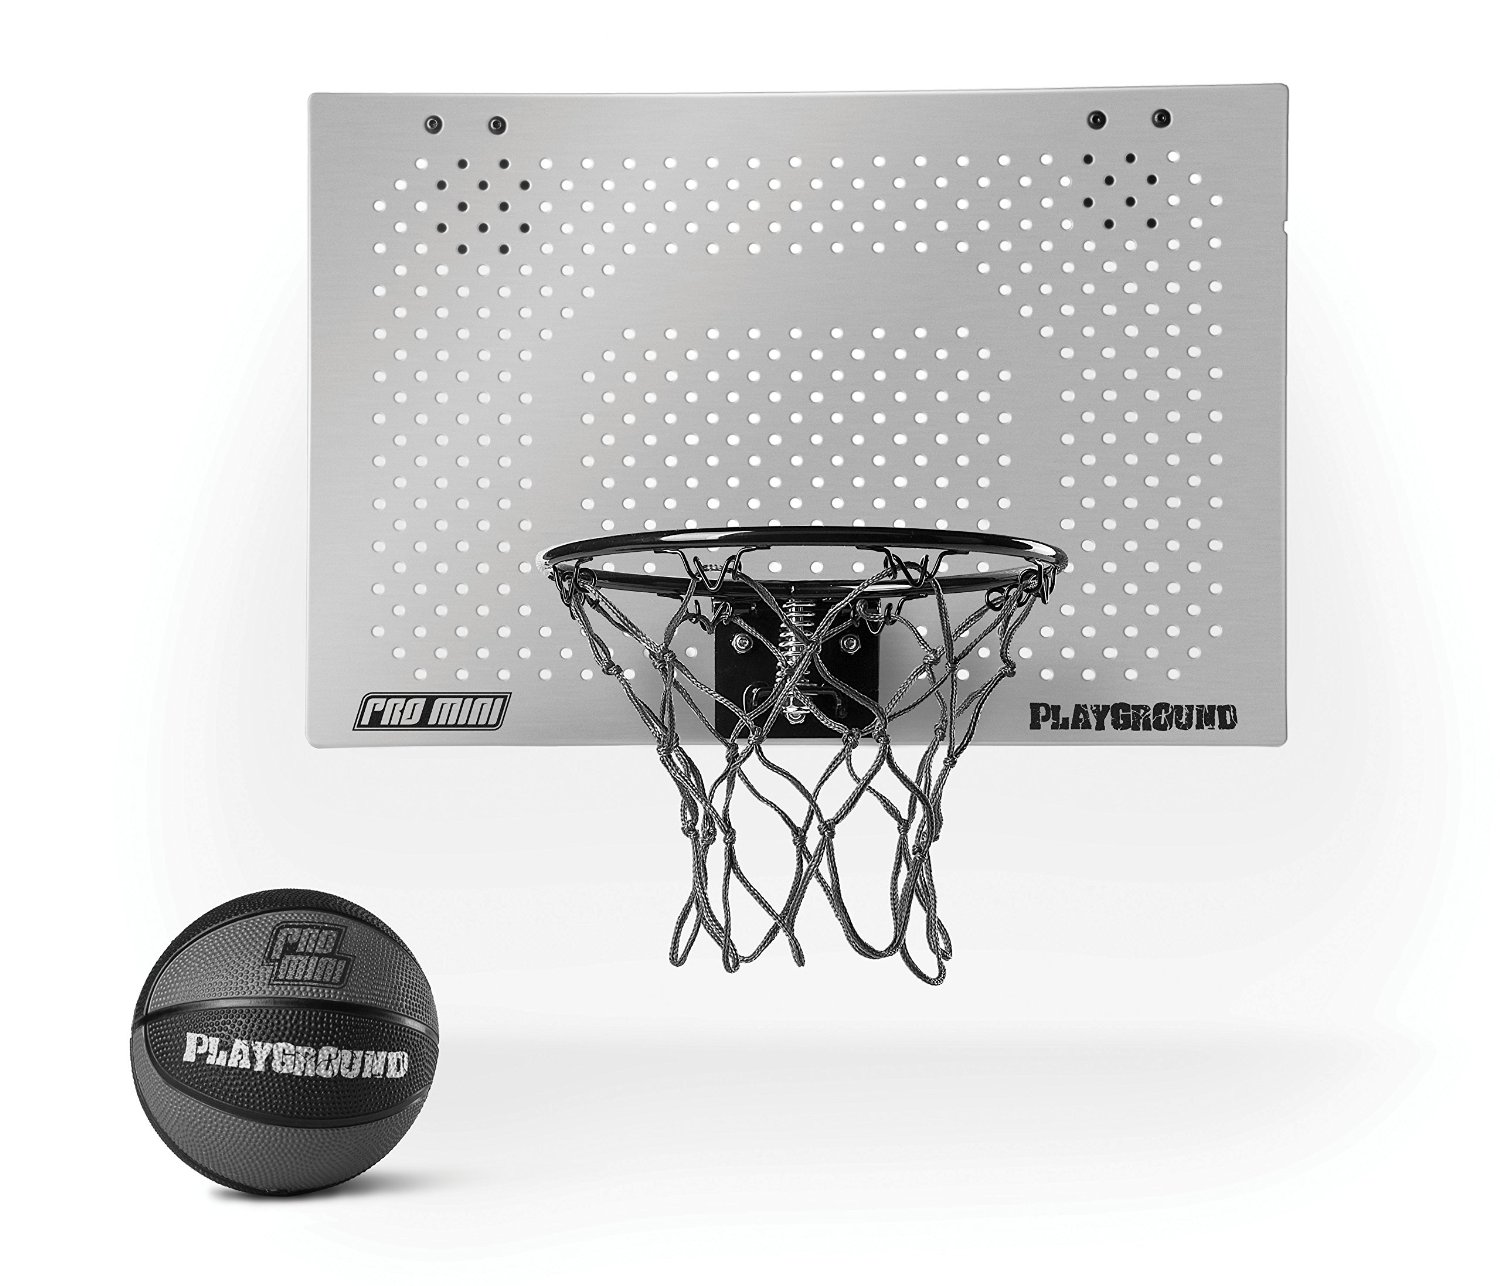 Over The Door Pro Mini Basketball Hoop, For Kids, Adults, And